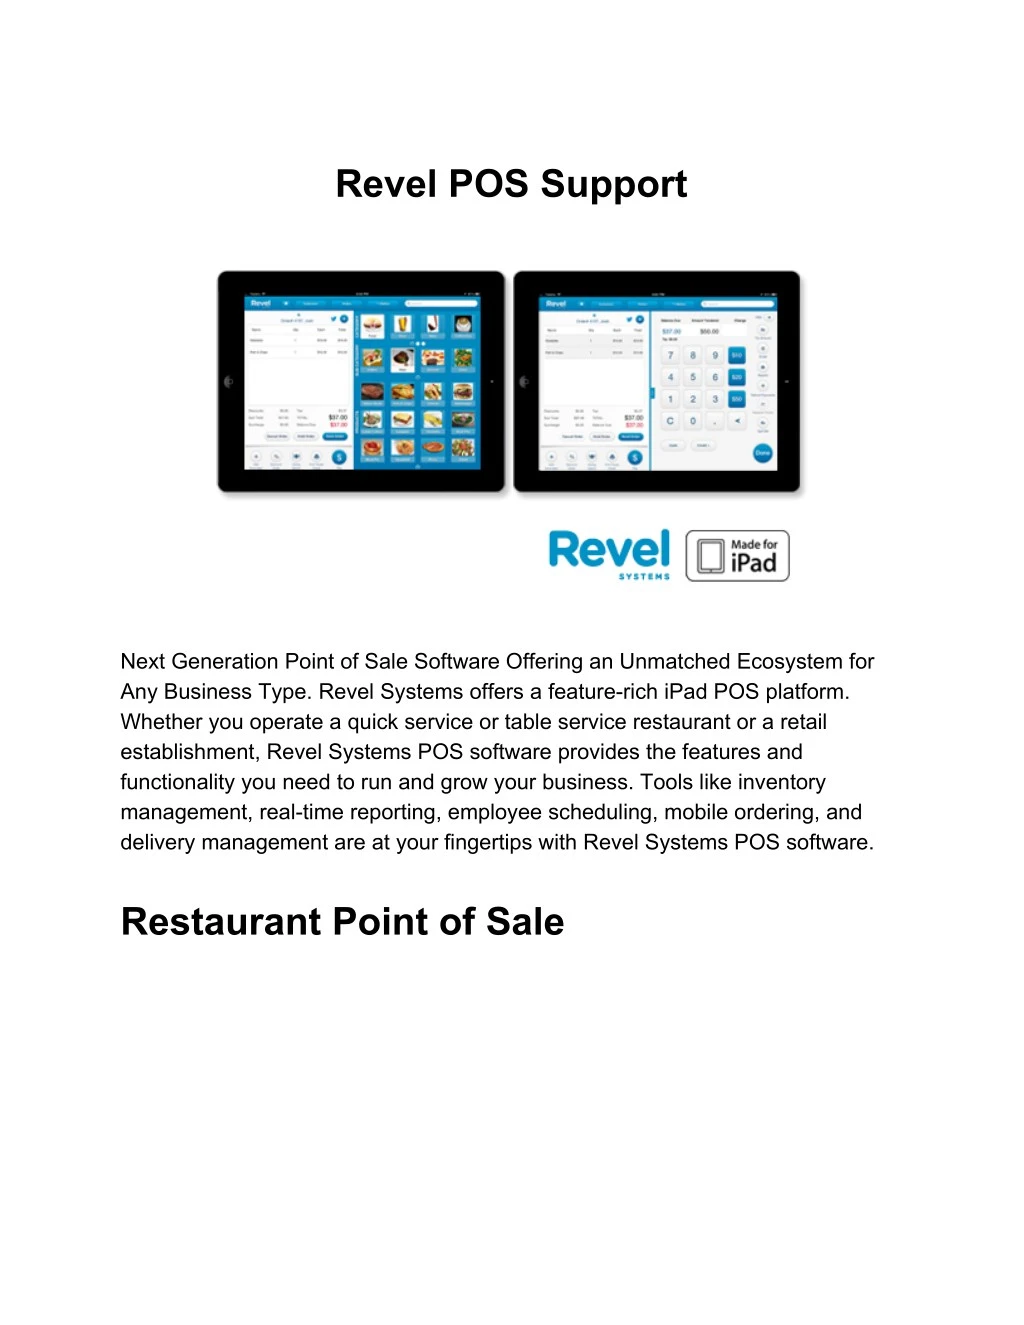 revel pos support